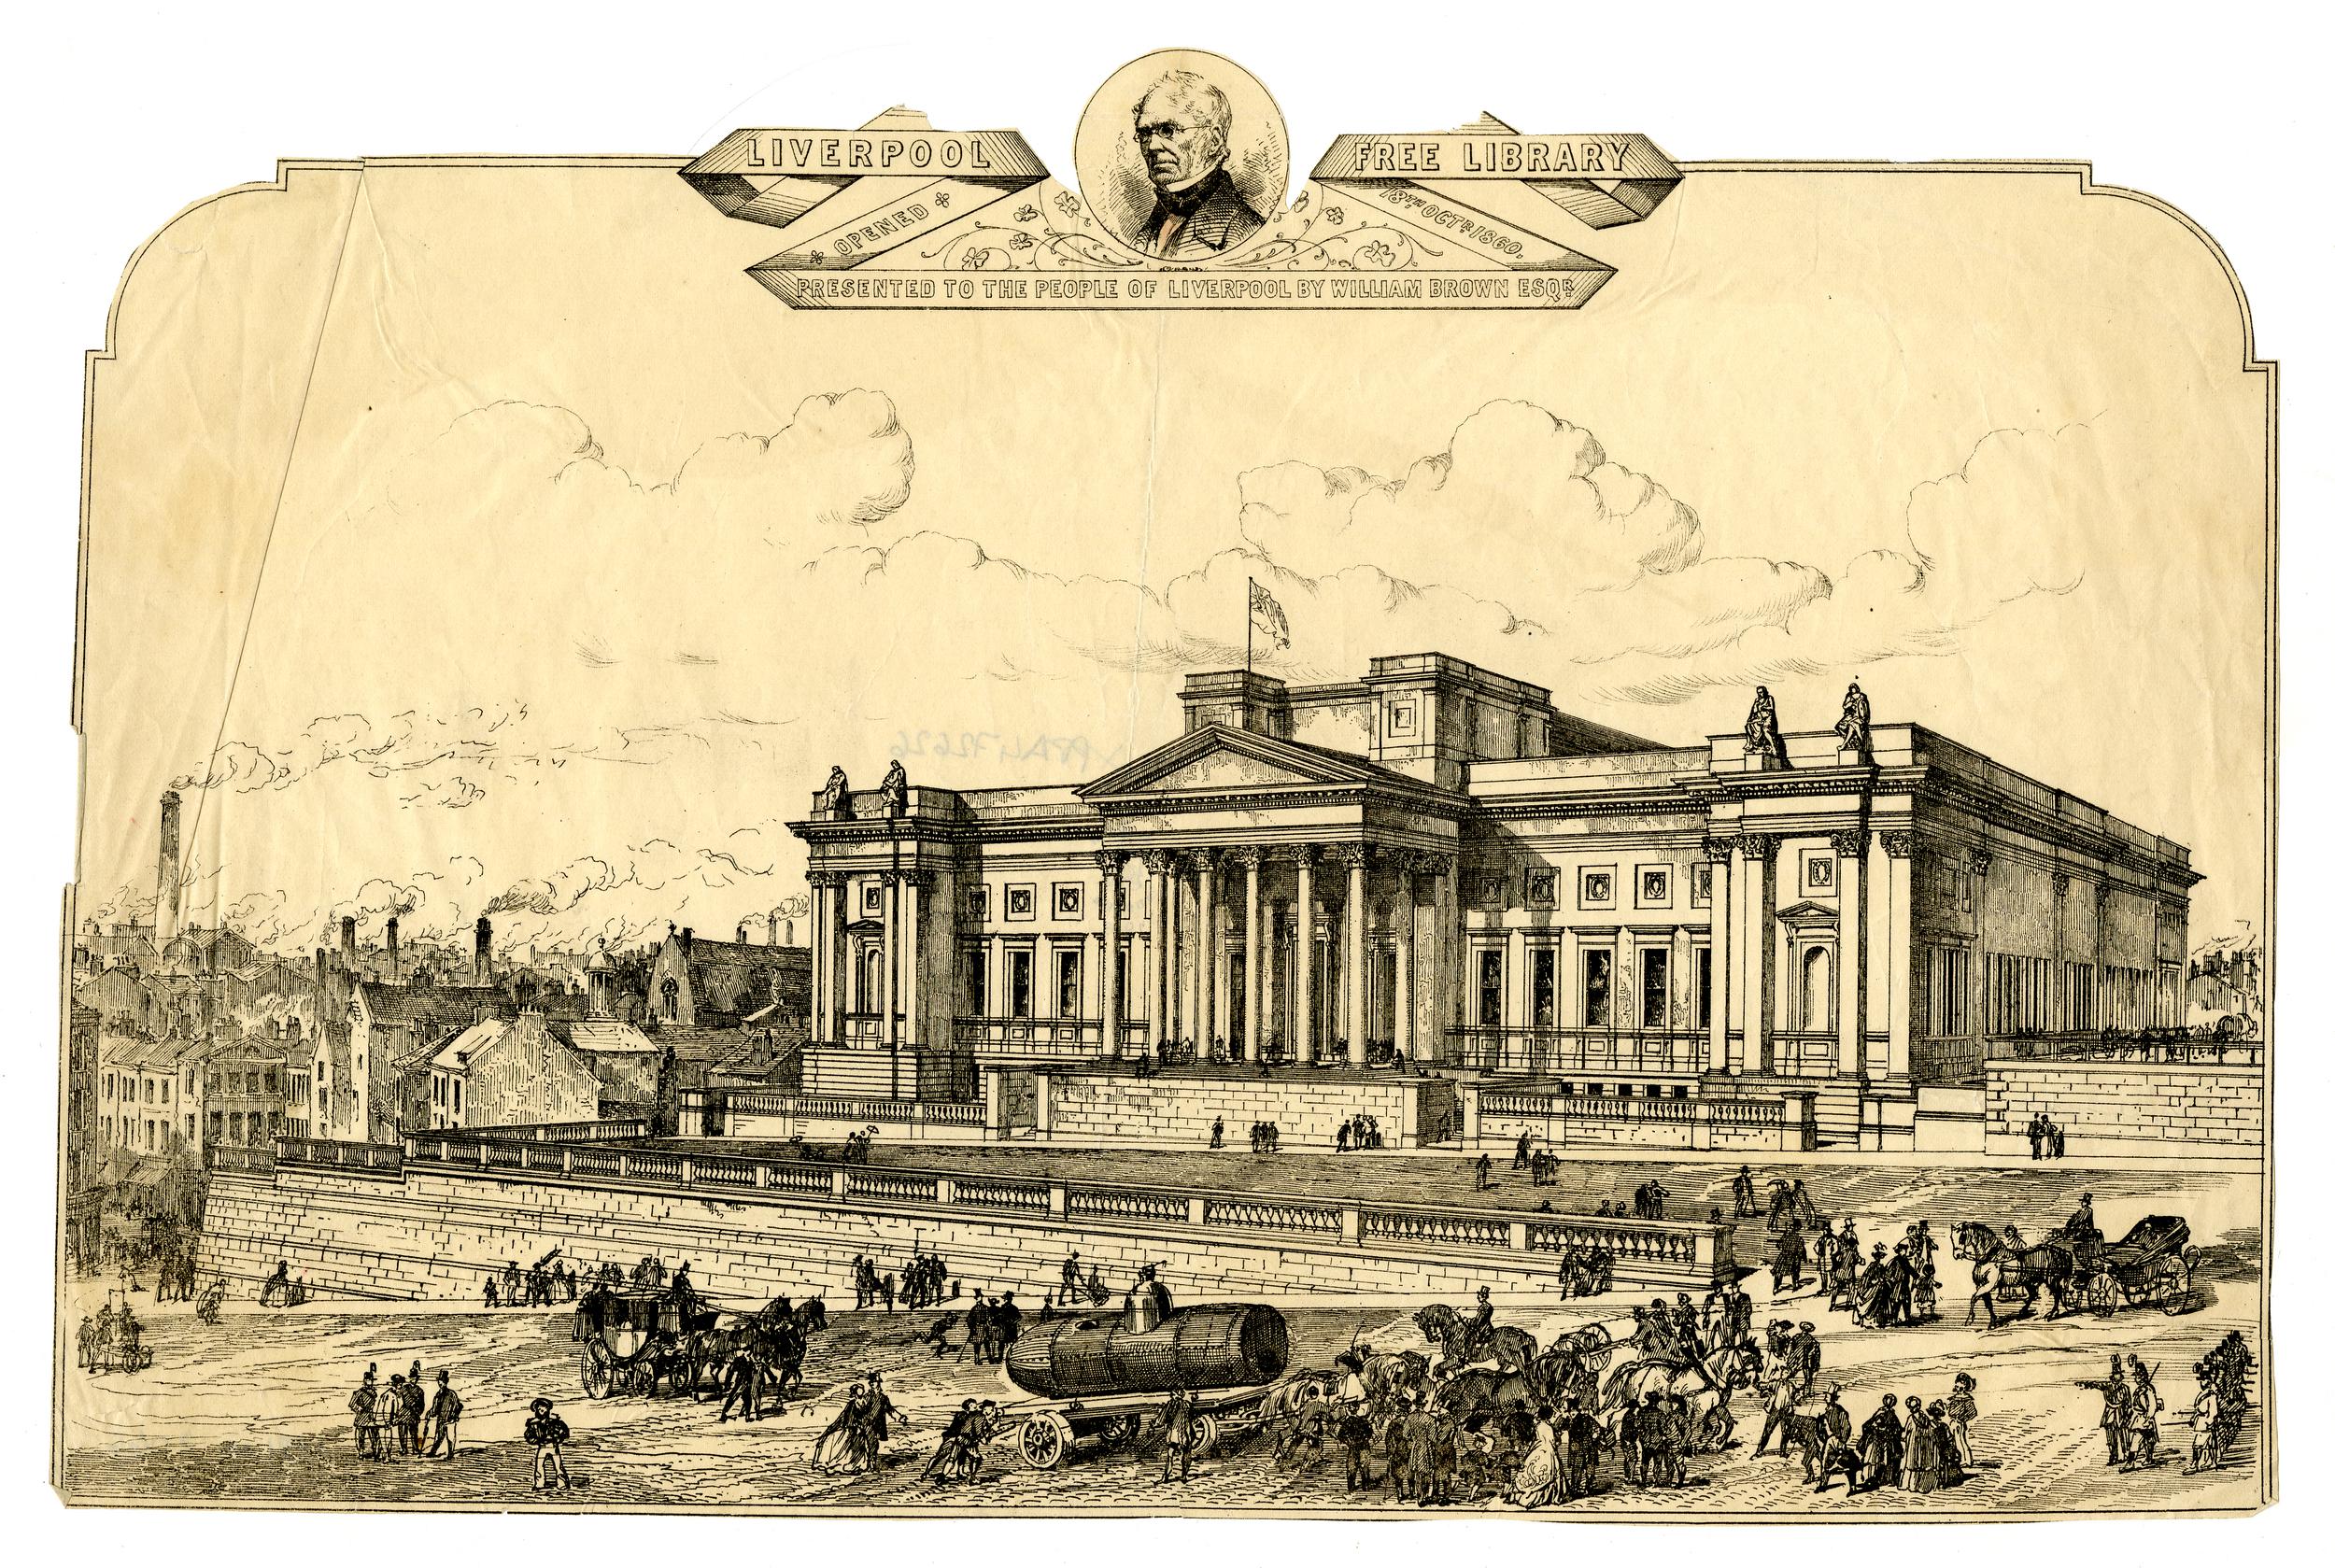 View of the front of Liverpool's Central Library, with columns outside the main entrance; a cart in the foreground pulled by horses, the half-bust portrait of William Brown at top.